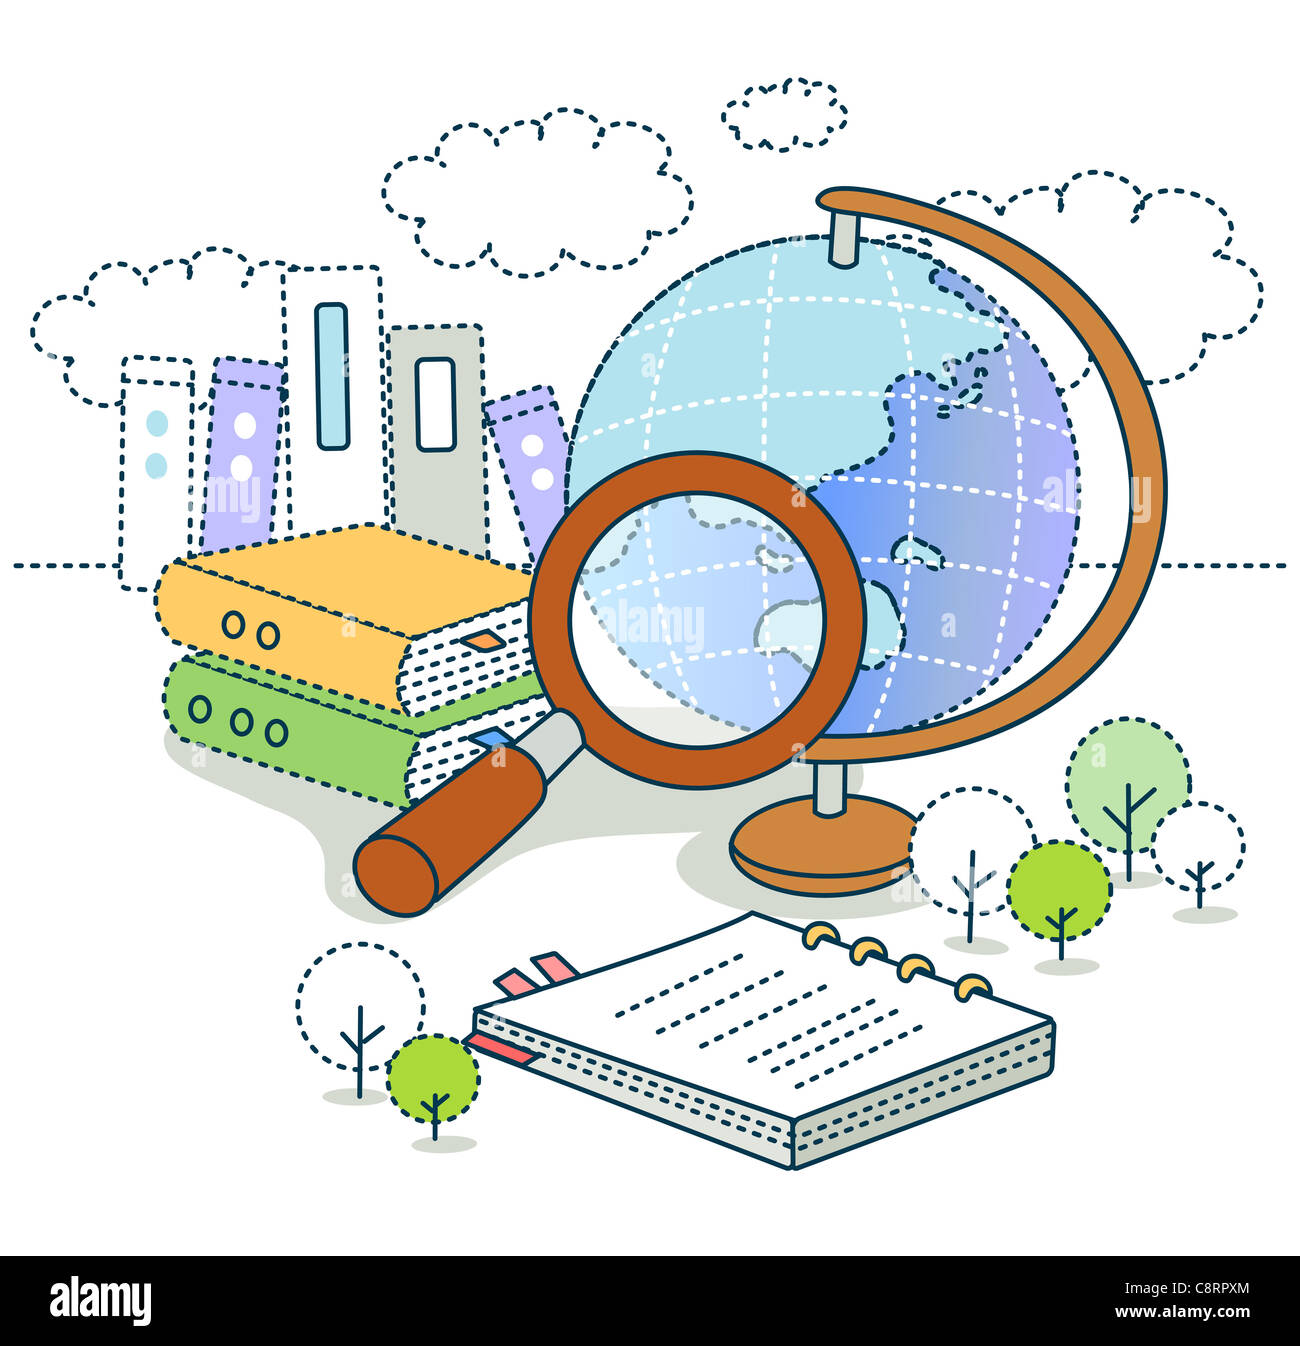 Illustration on magnifying glass and globe Stock Photo